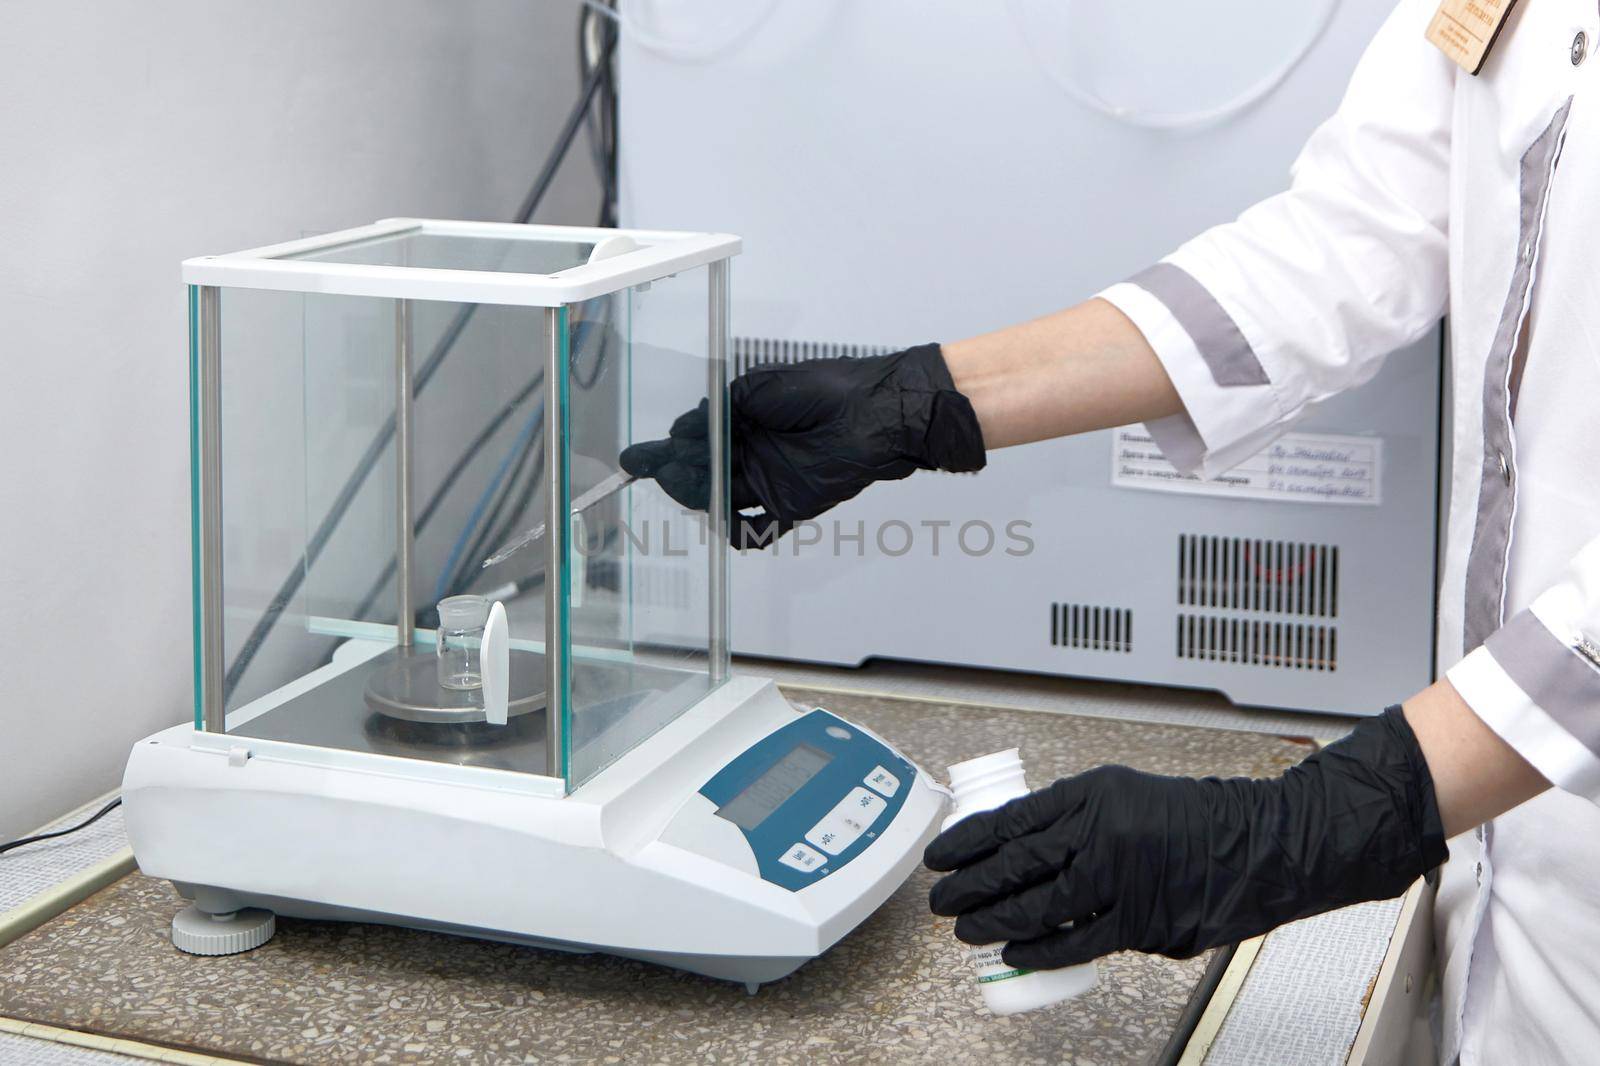 Scientist weighing chemicals by digital scales in grams in the chemical laboratory